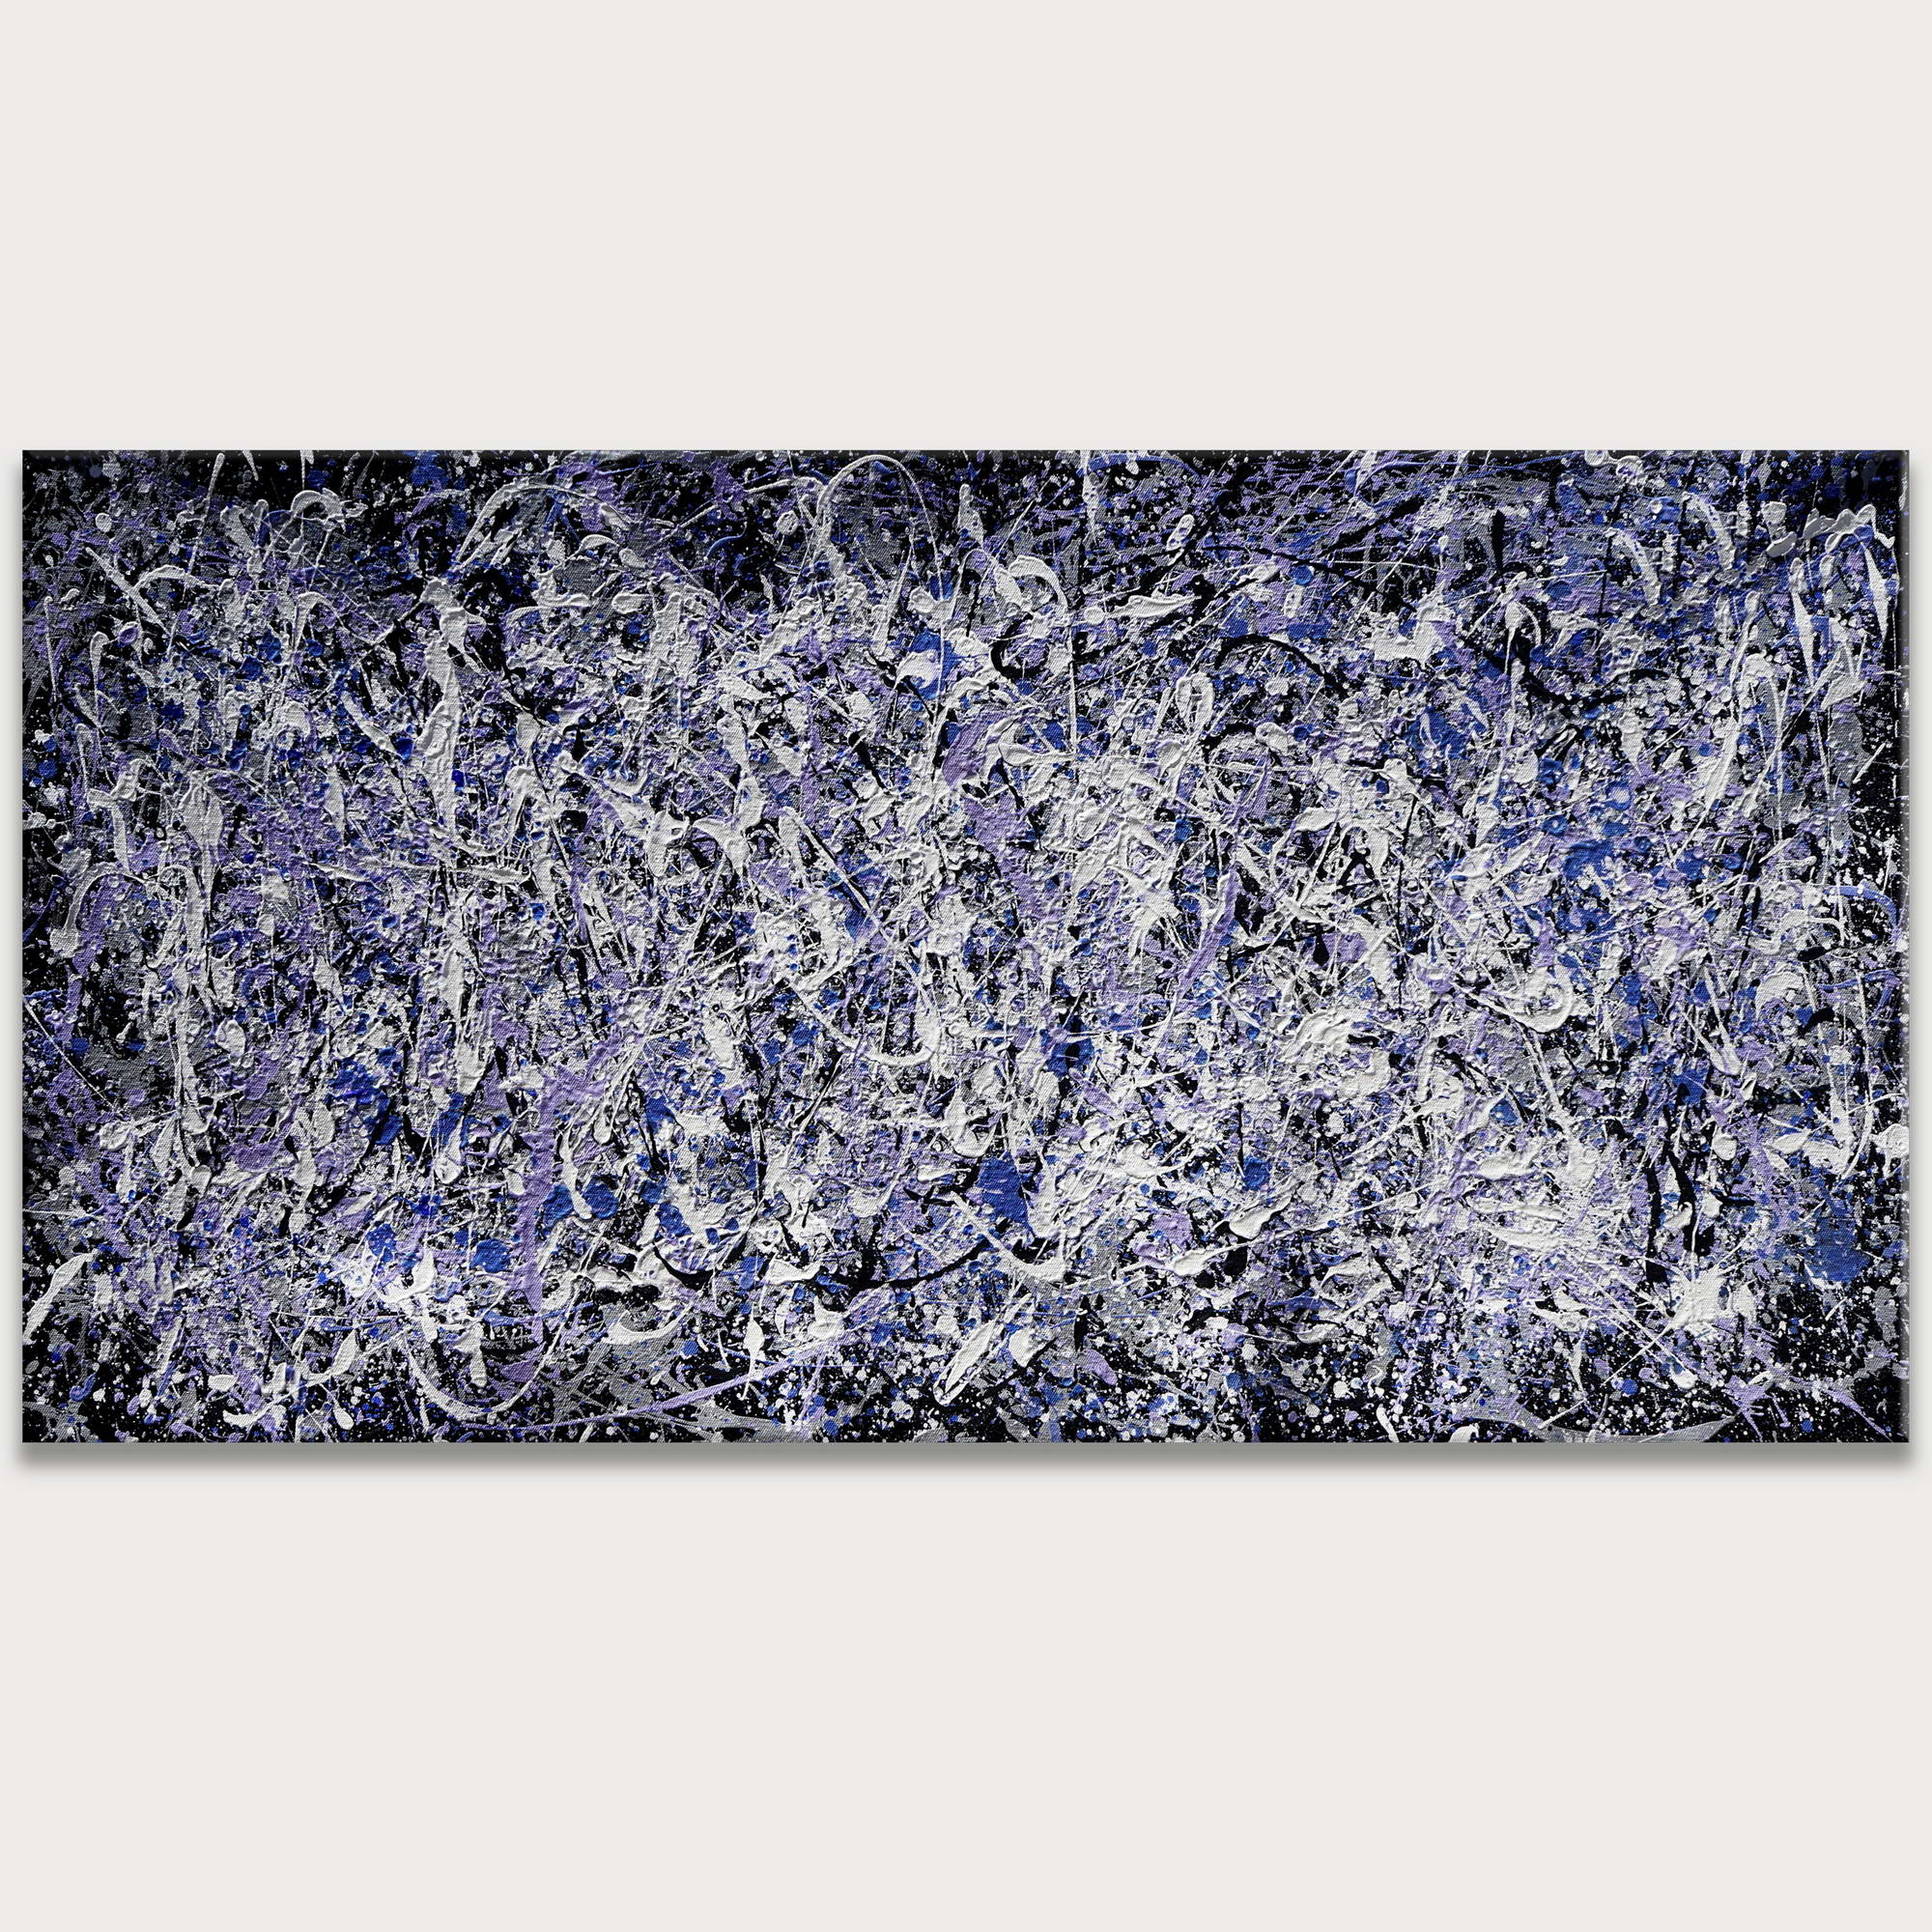 Hand painted Abstract Blue and White Pollock style 75x150cm